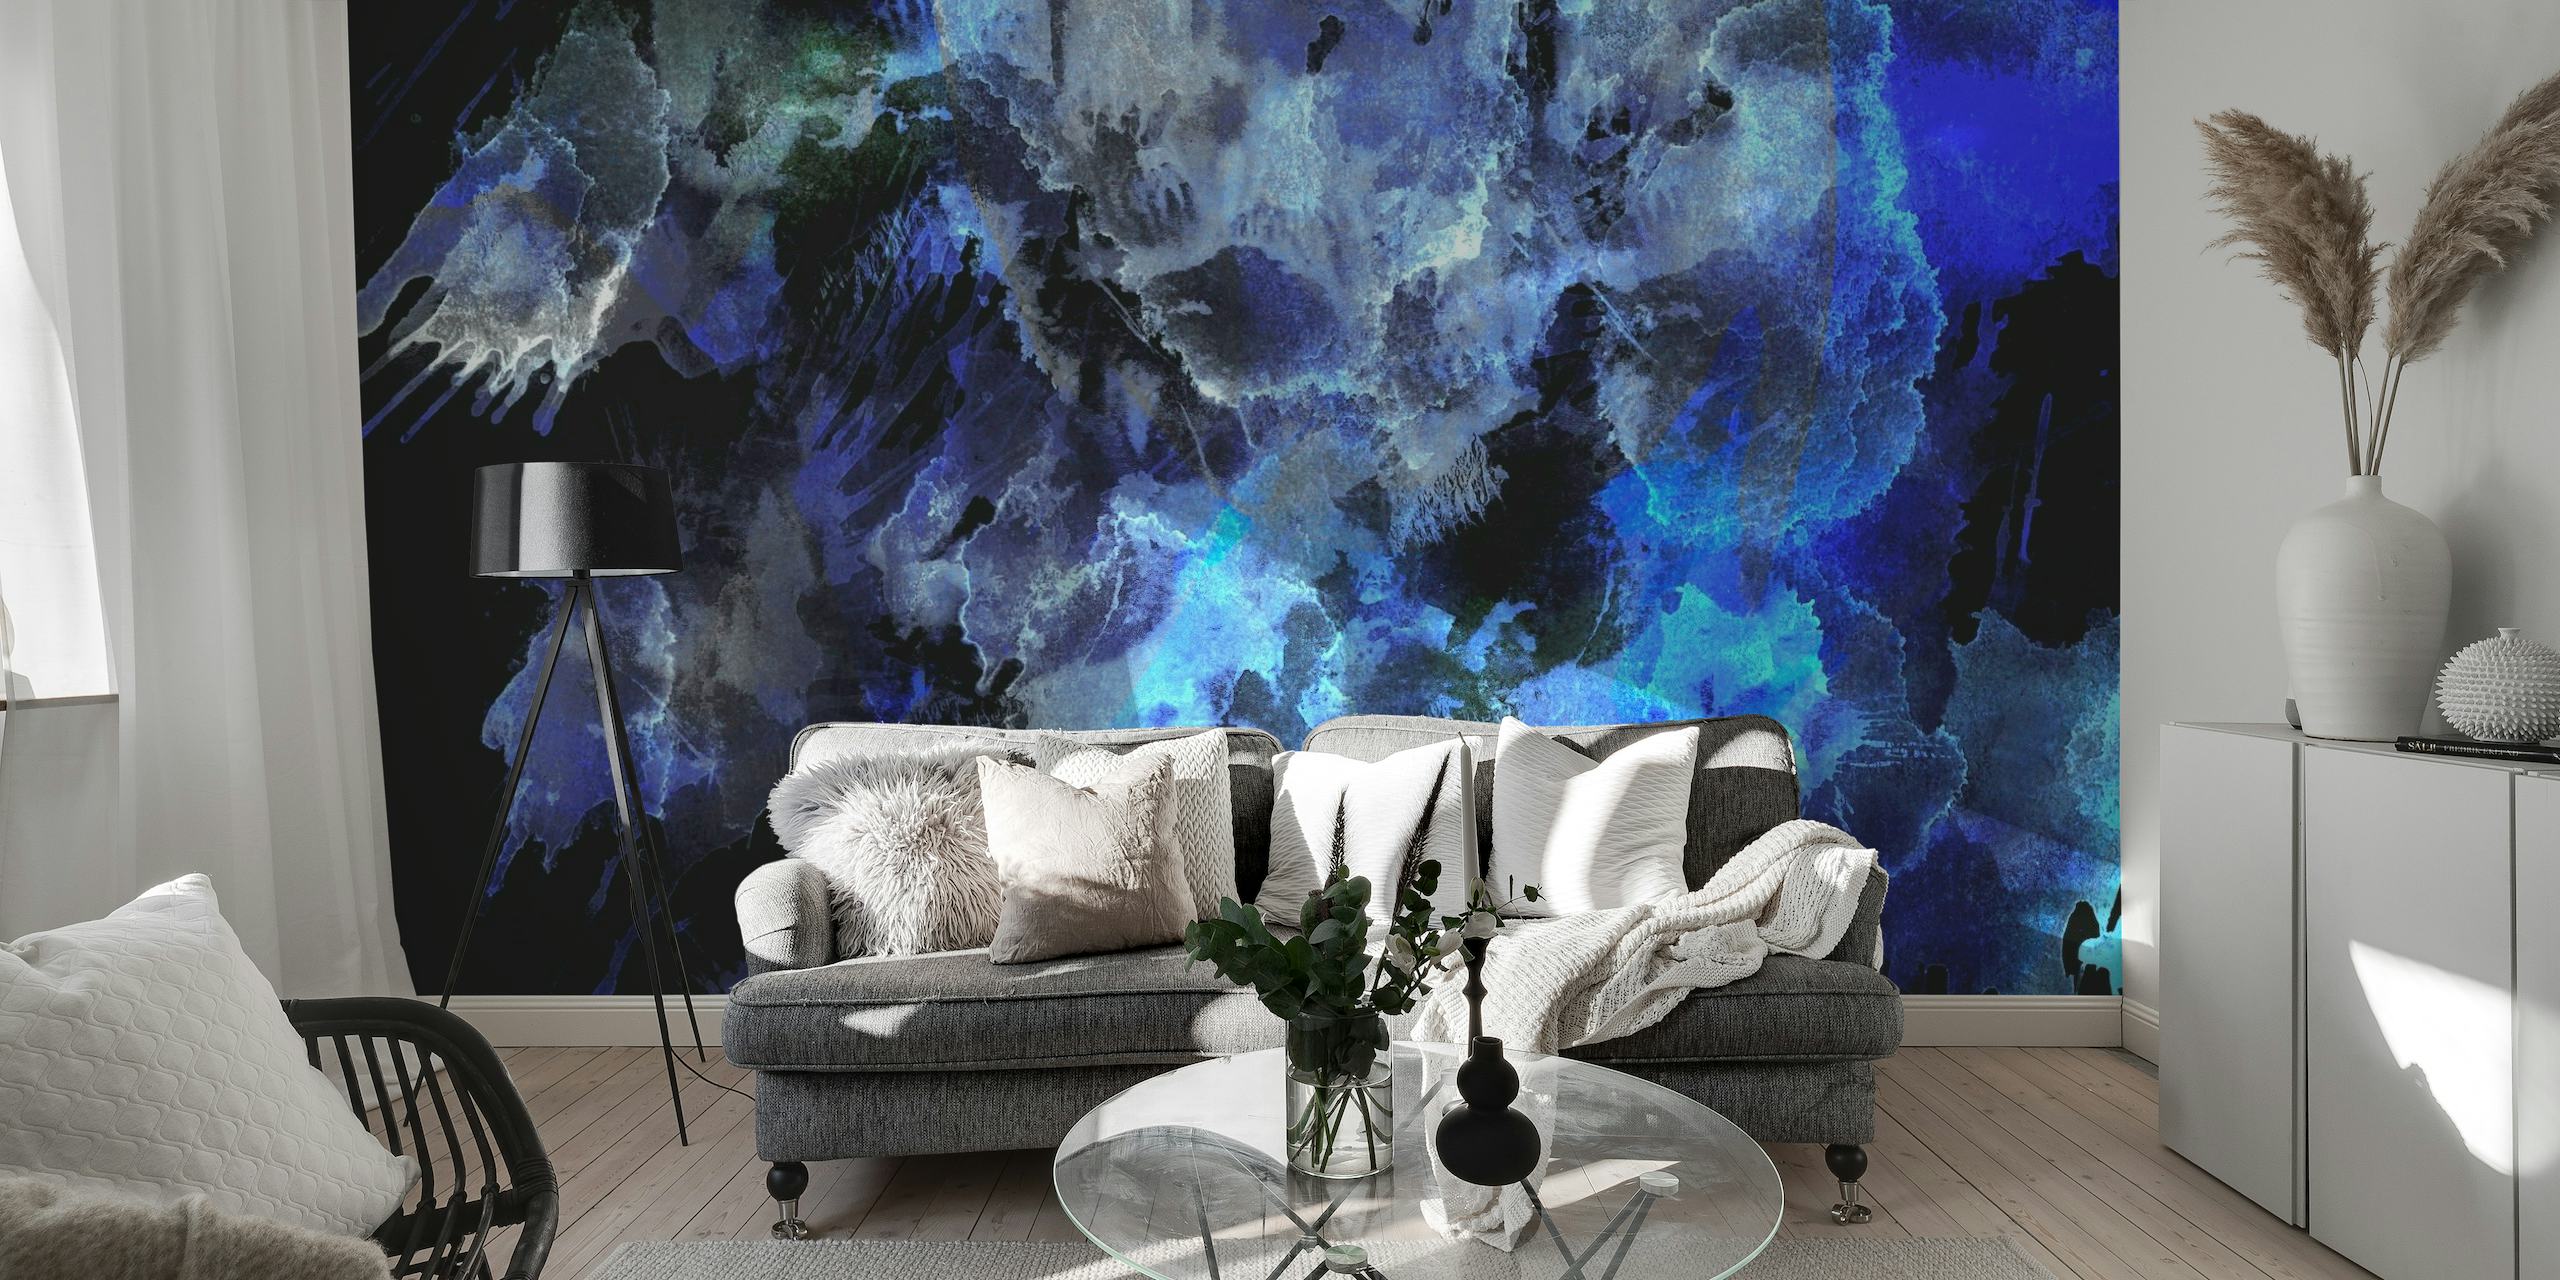 Abstract midnight blue and black watercolor wall mural creating an oceanic ambiance